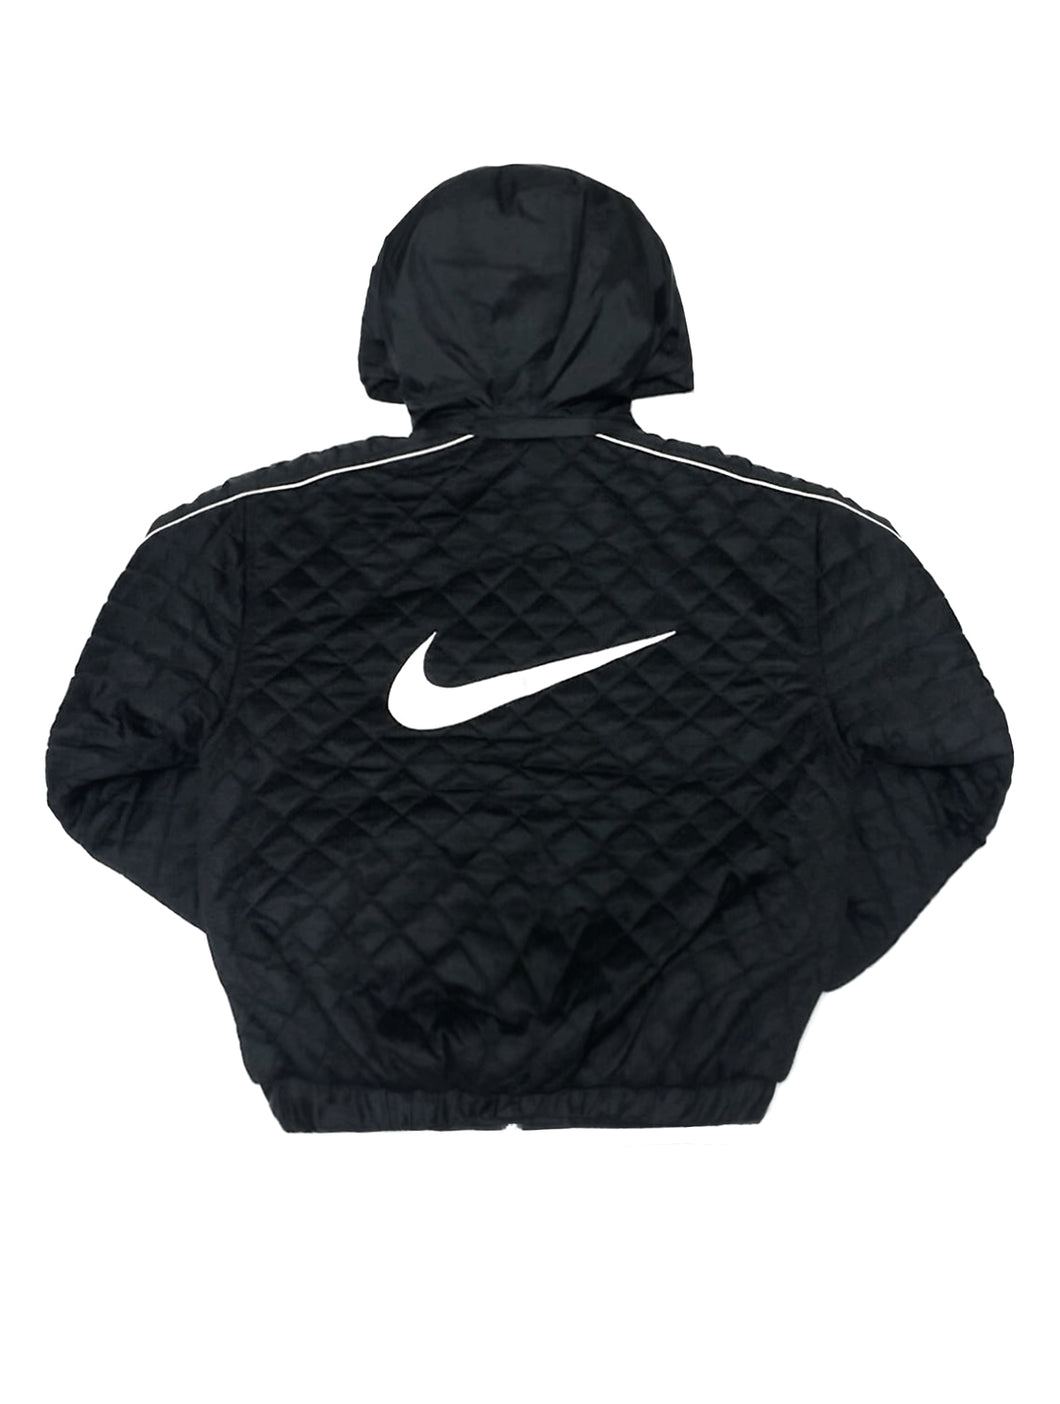 Nike Rare Quilted Black Bomber Jacket